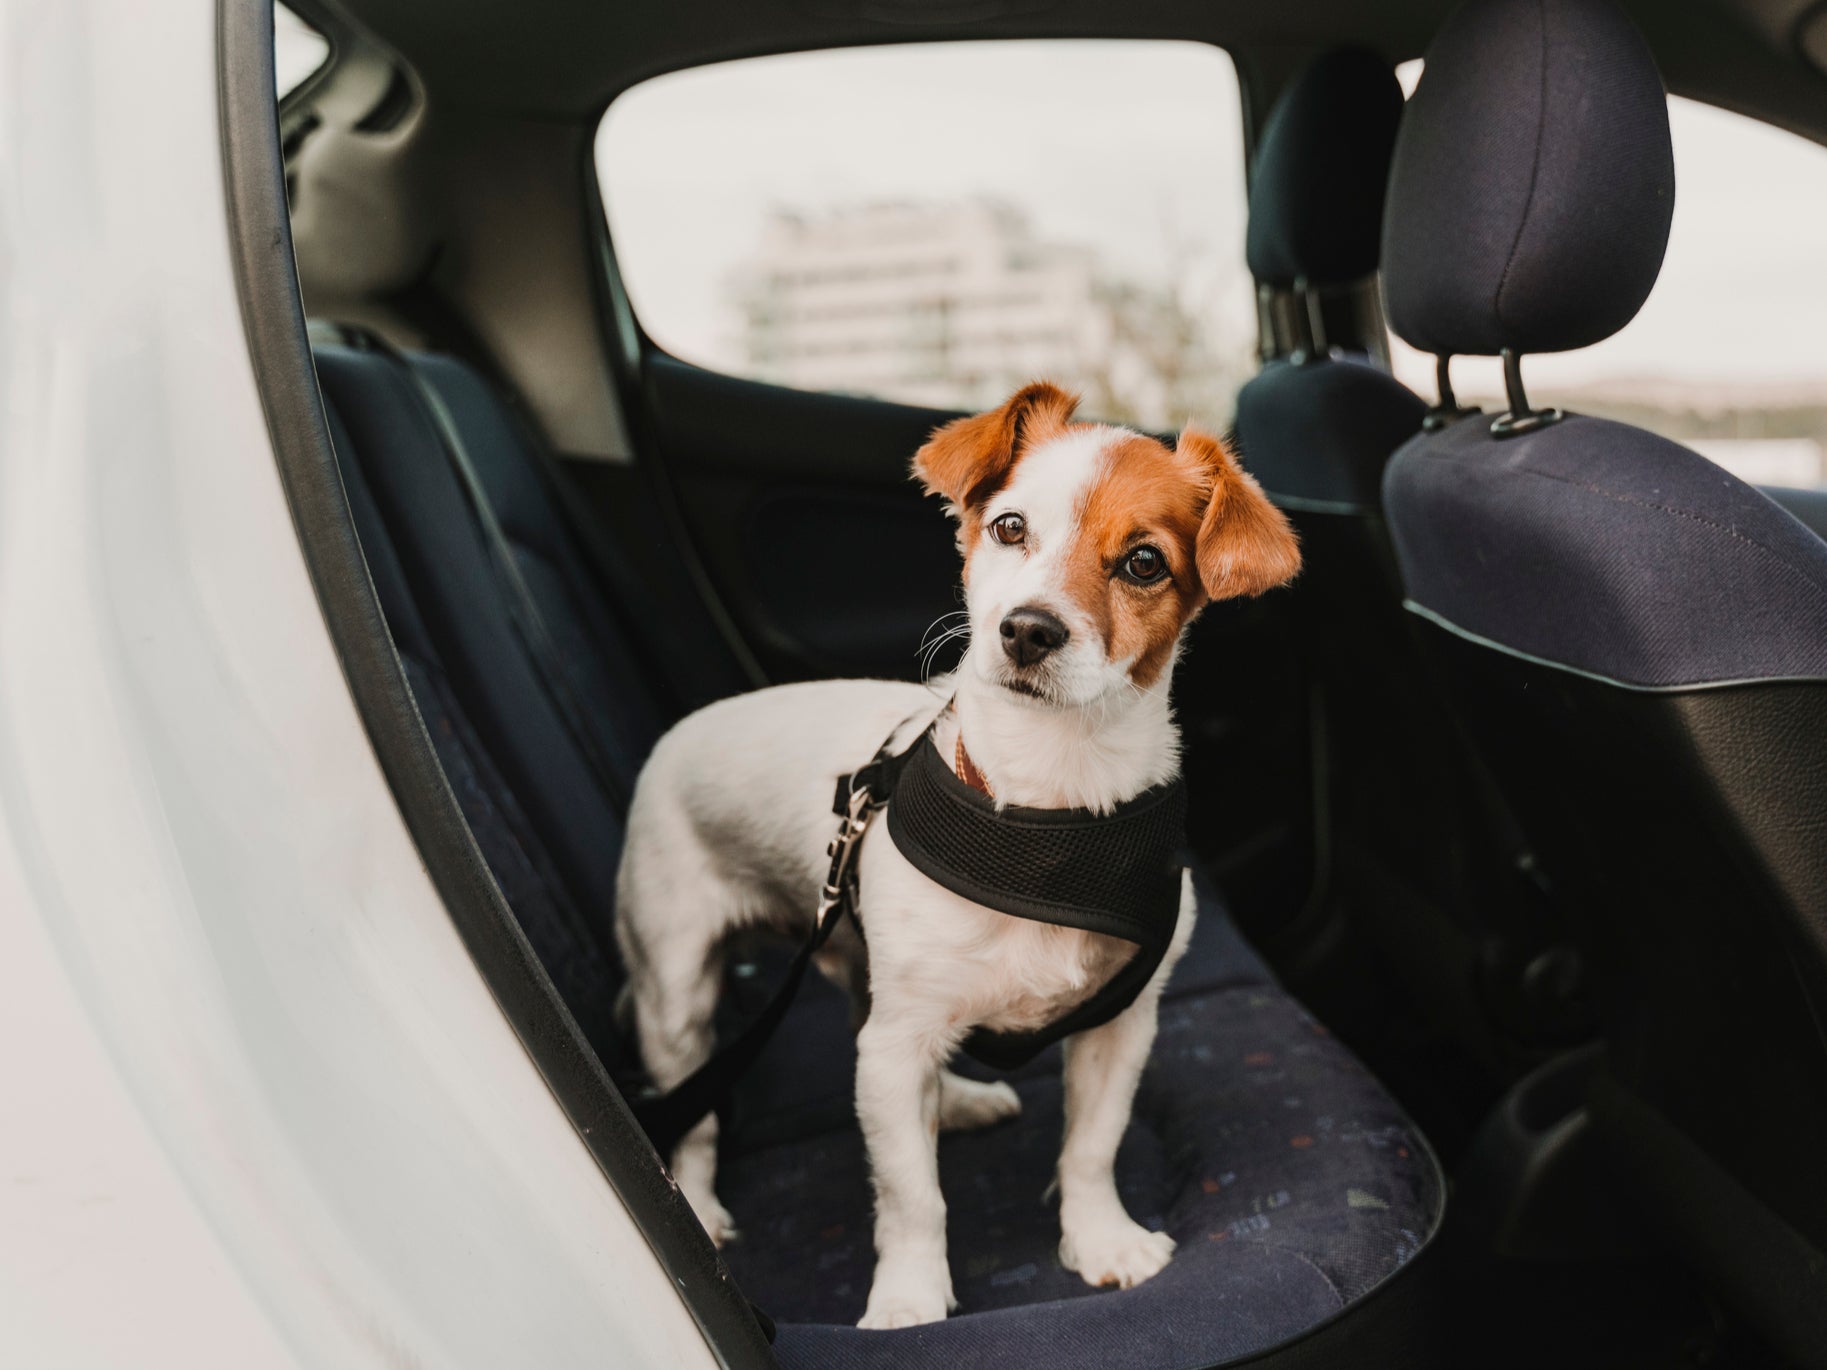 A small Jack Russel dog in a car